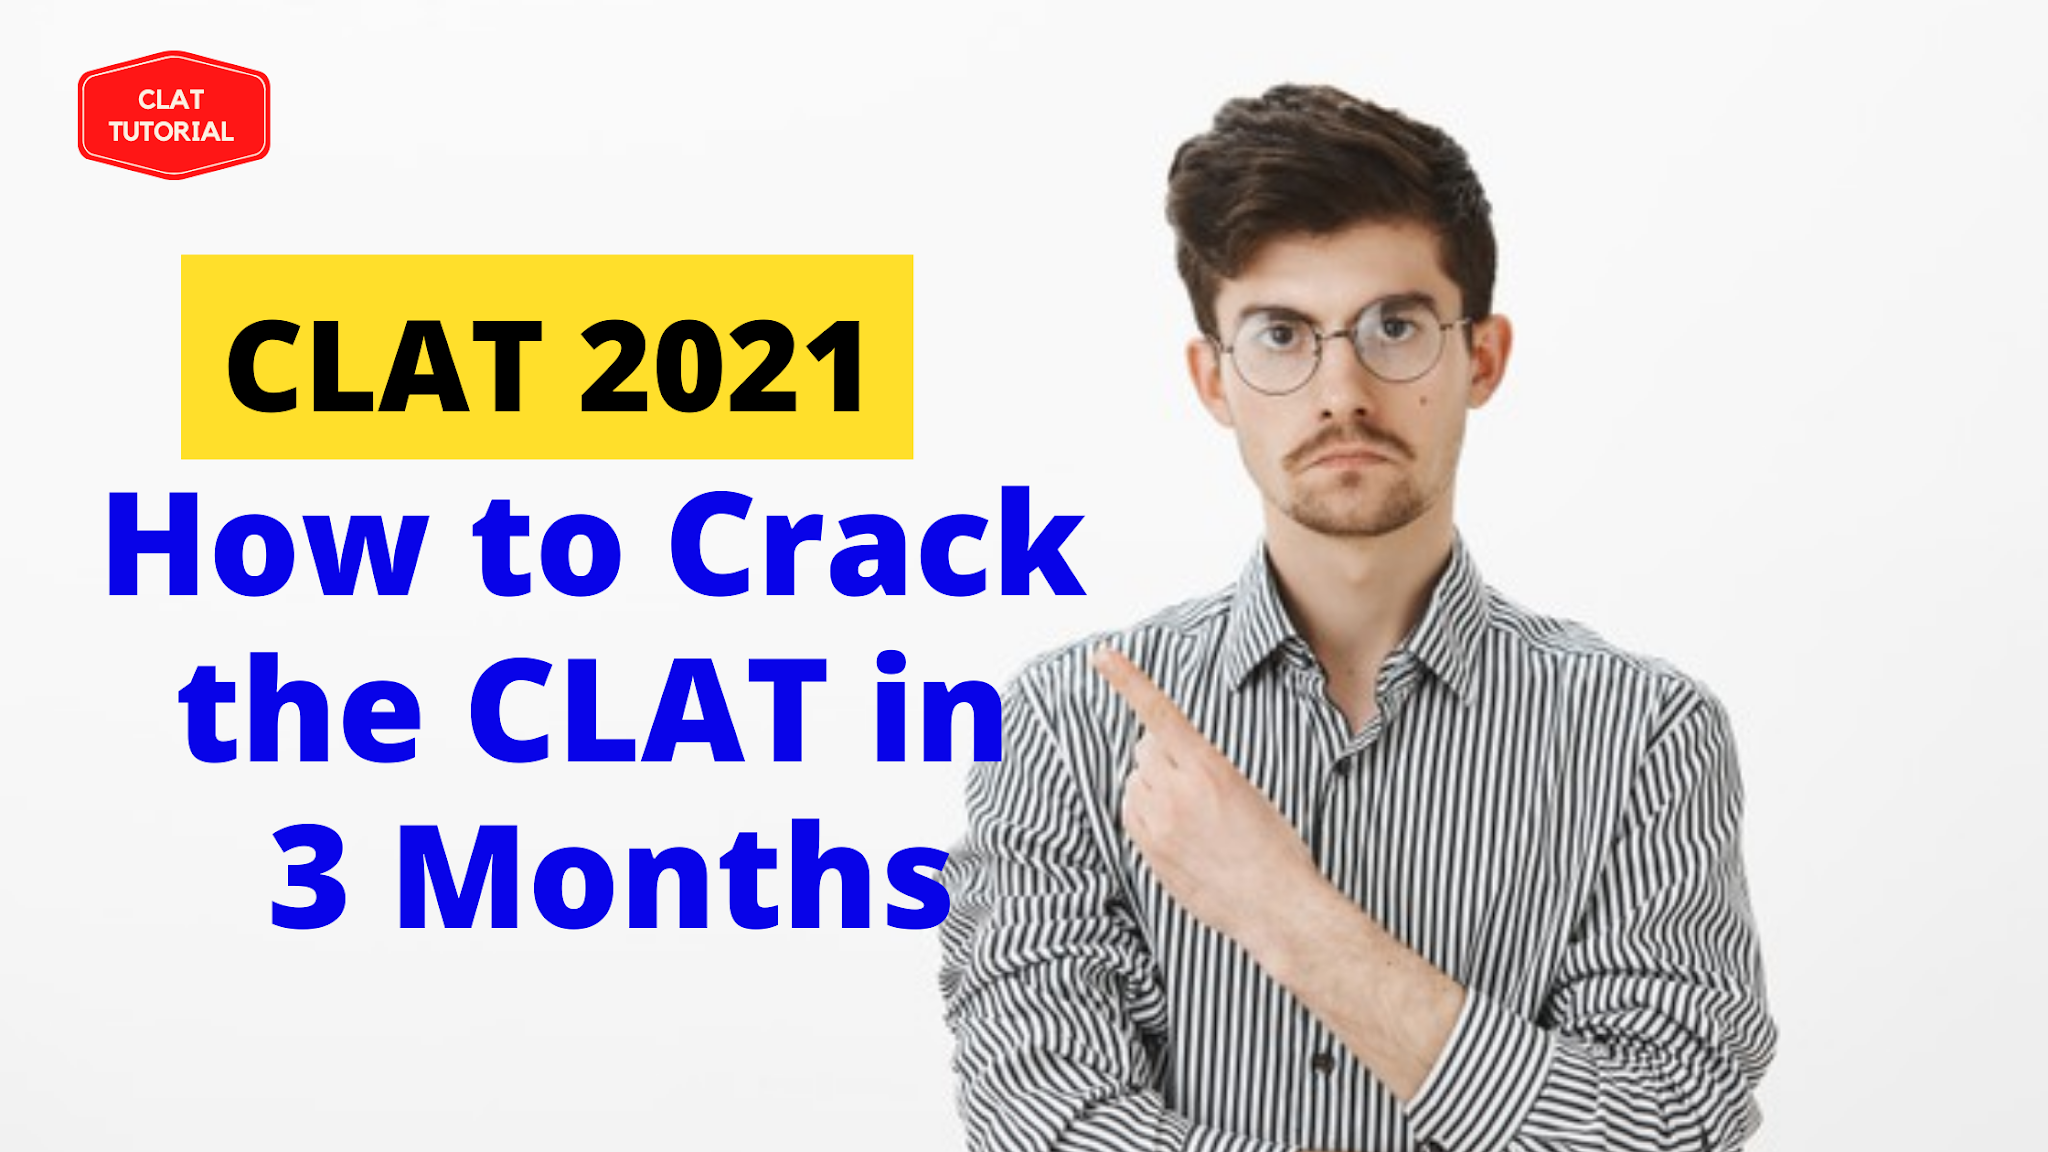 3 months to clat 2021